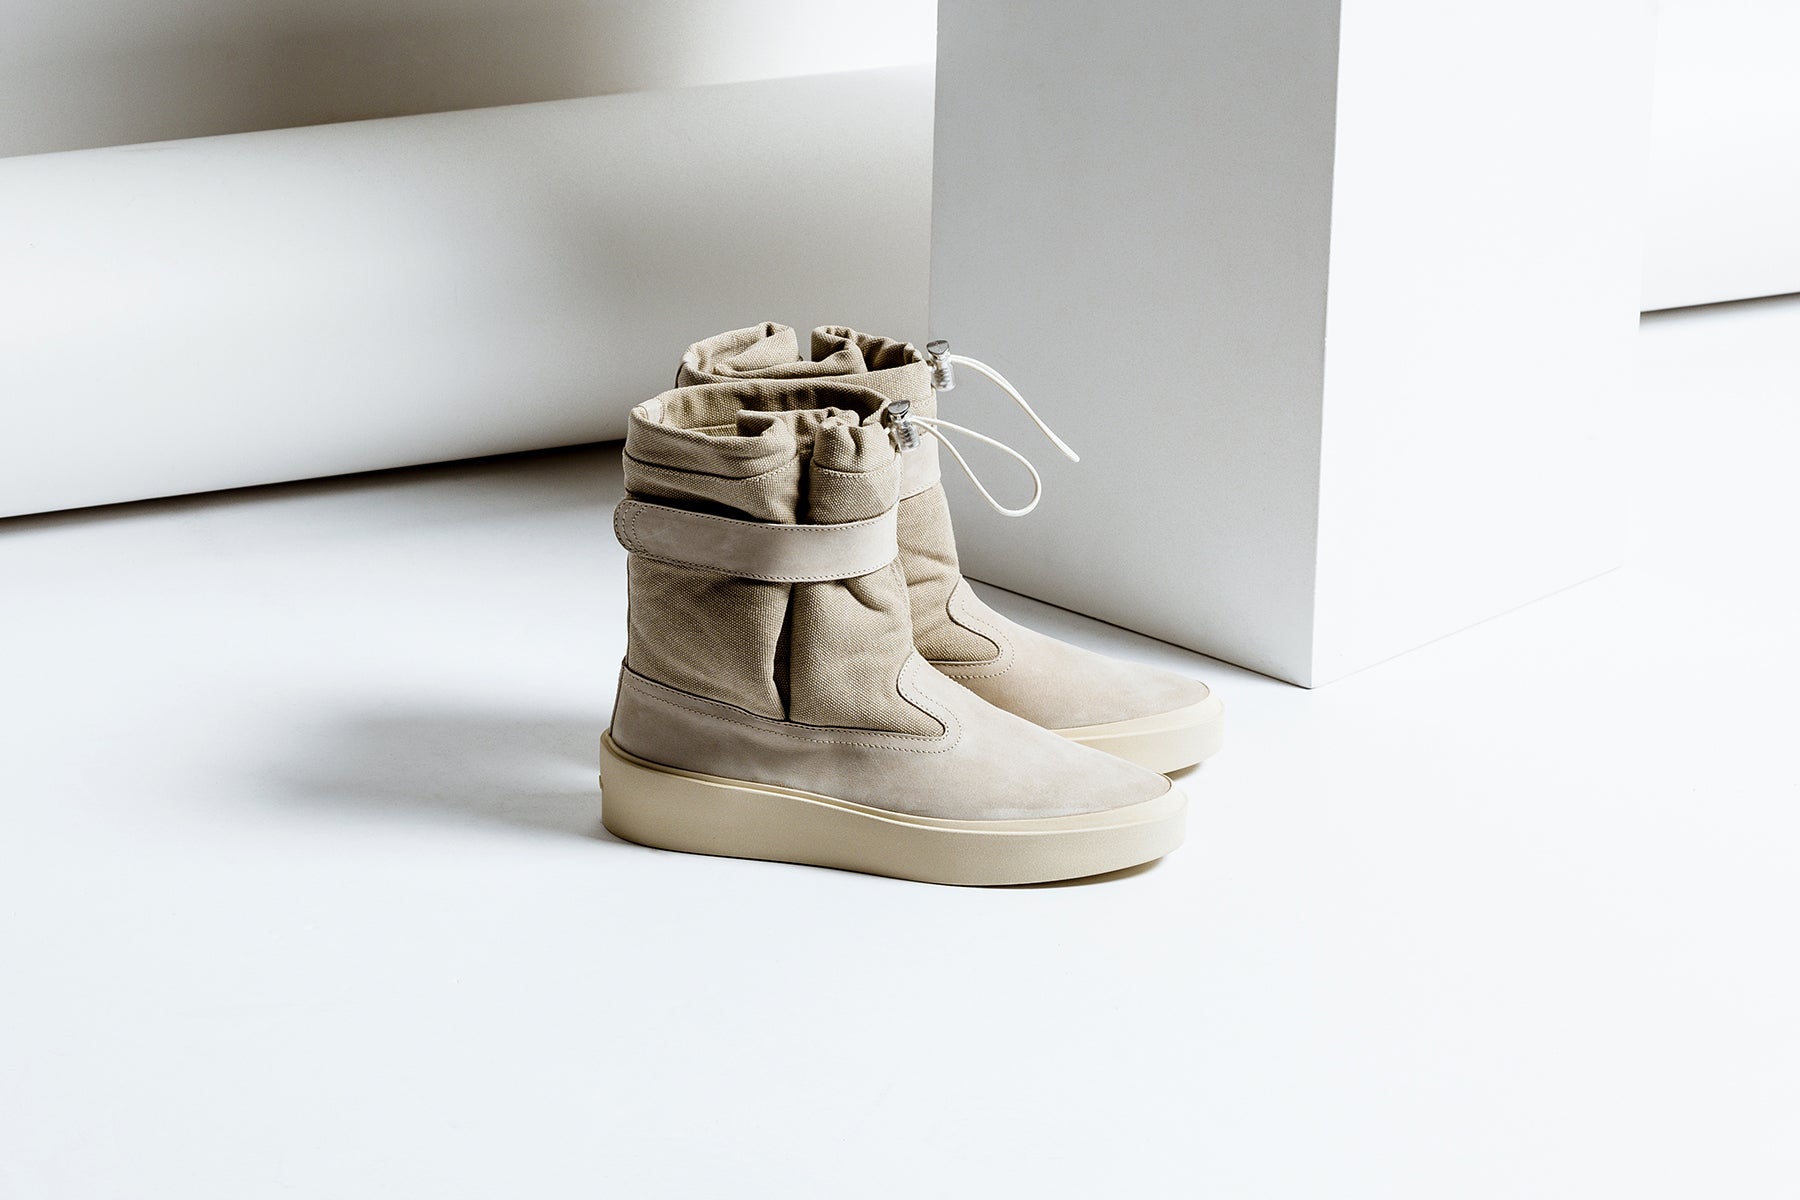 FEAR OF GOD SKI LOUNGE BOOT / BLK GRY